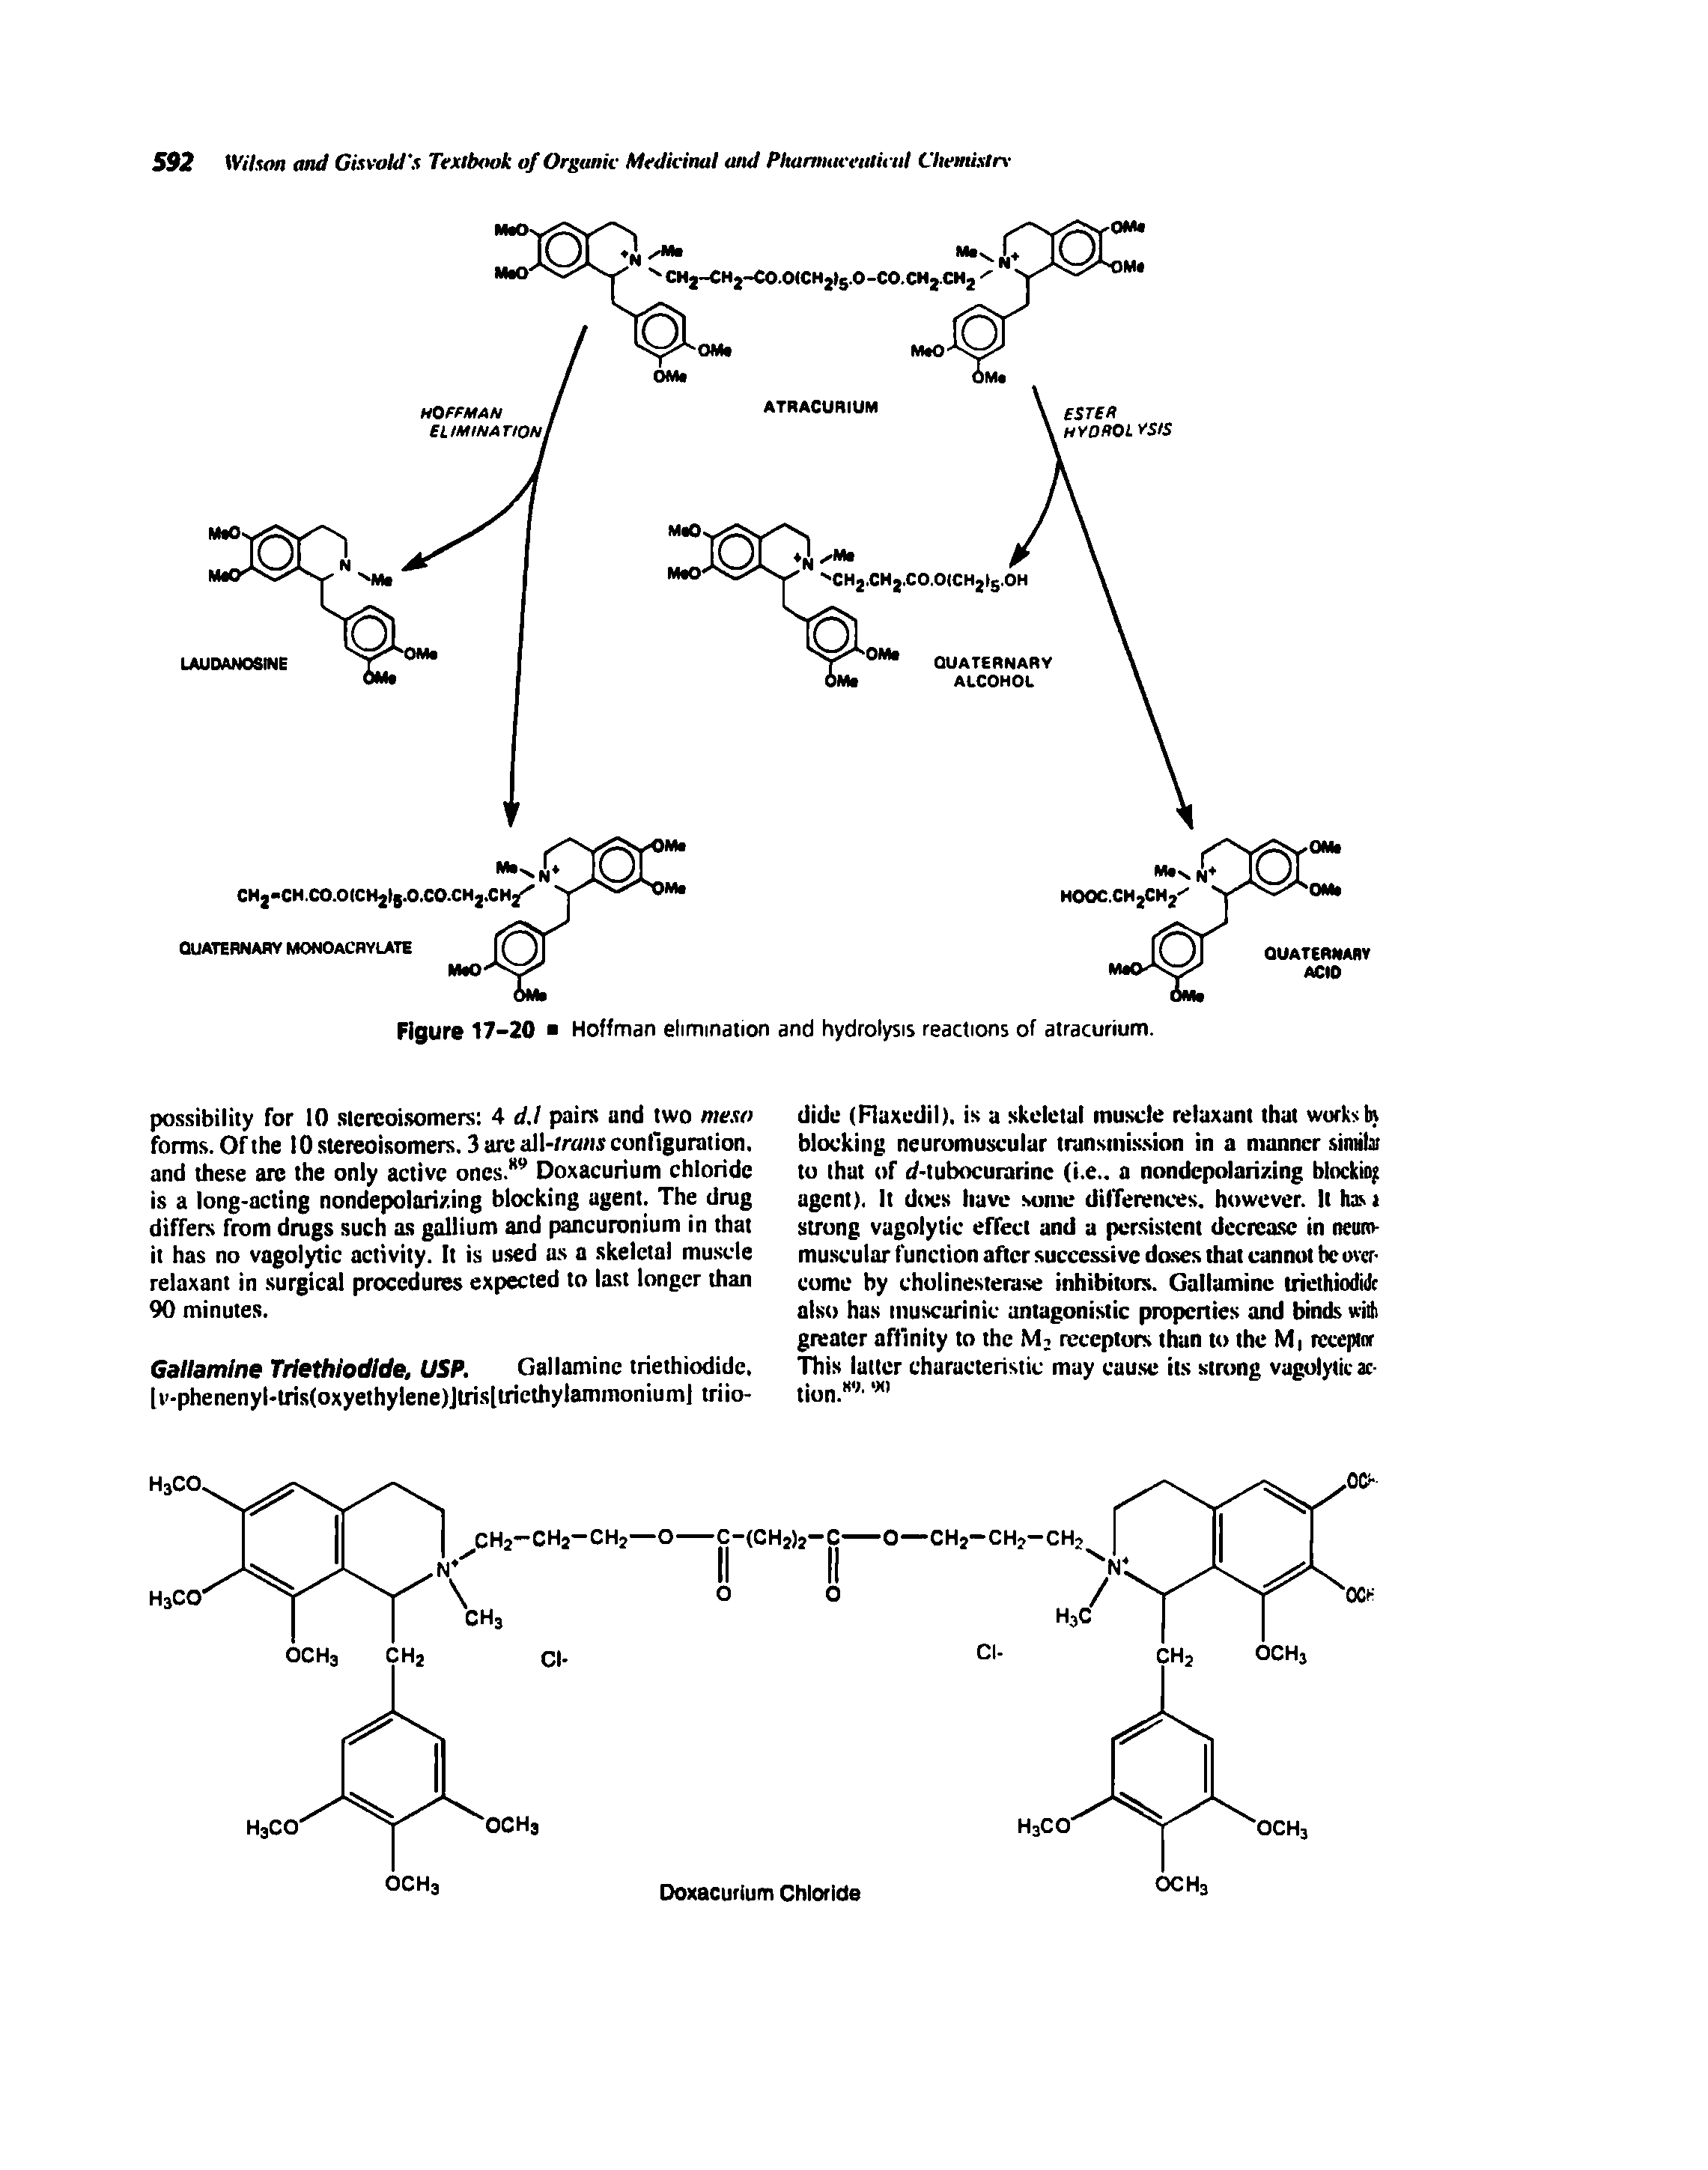 Figure 17-20 Hoffman elimination and hydrolysis reactions of atracurium.